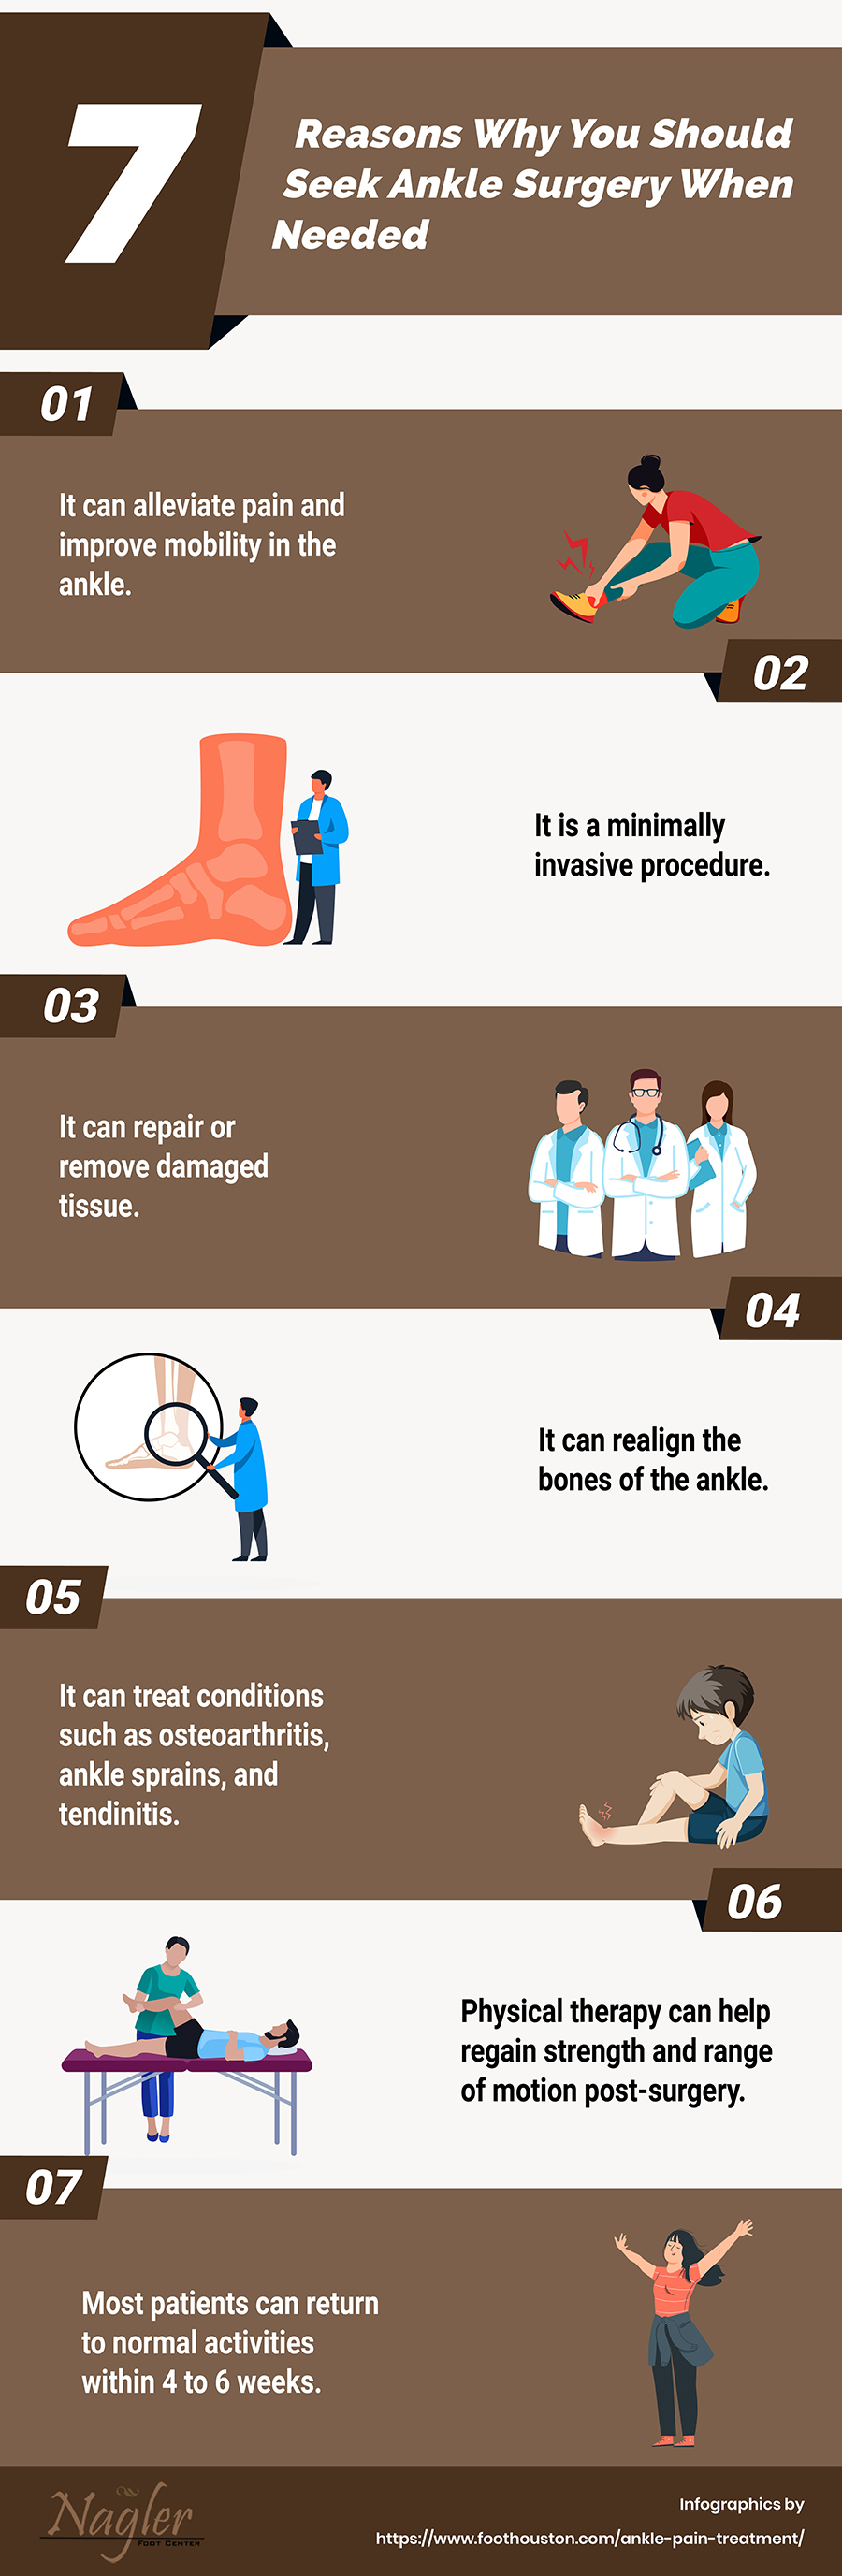 Reasons Why You Should Seek Ankle Surgery When Needed 